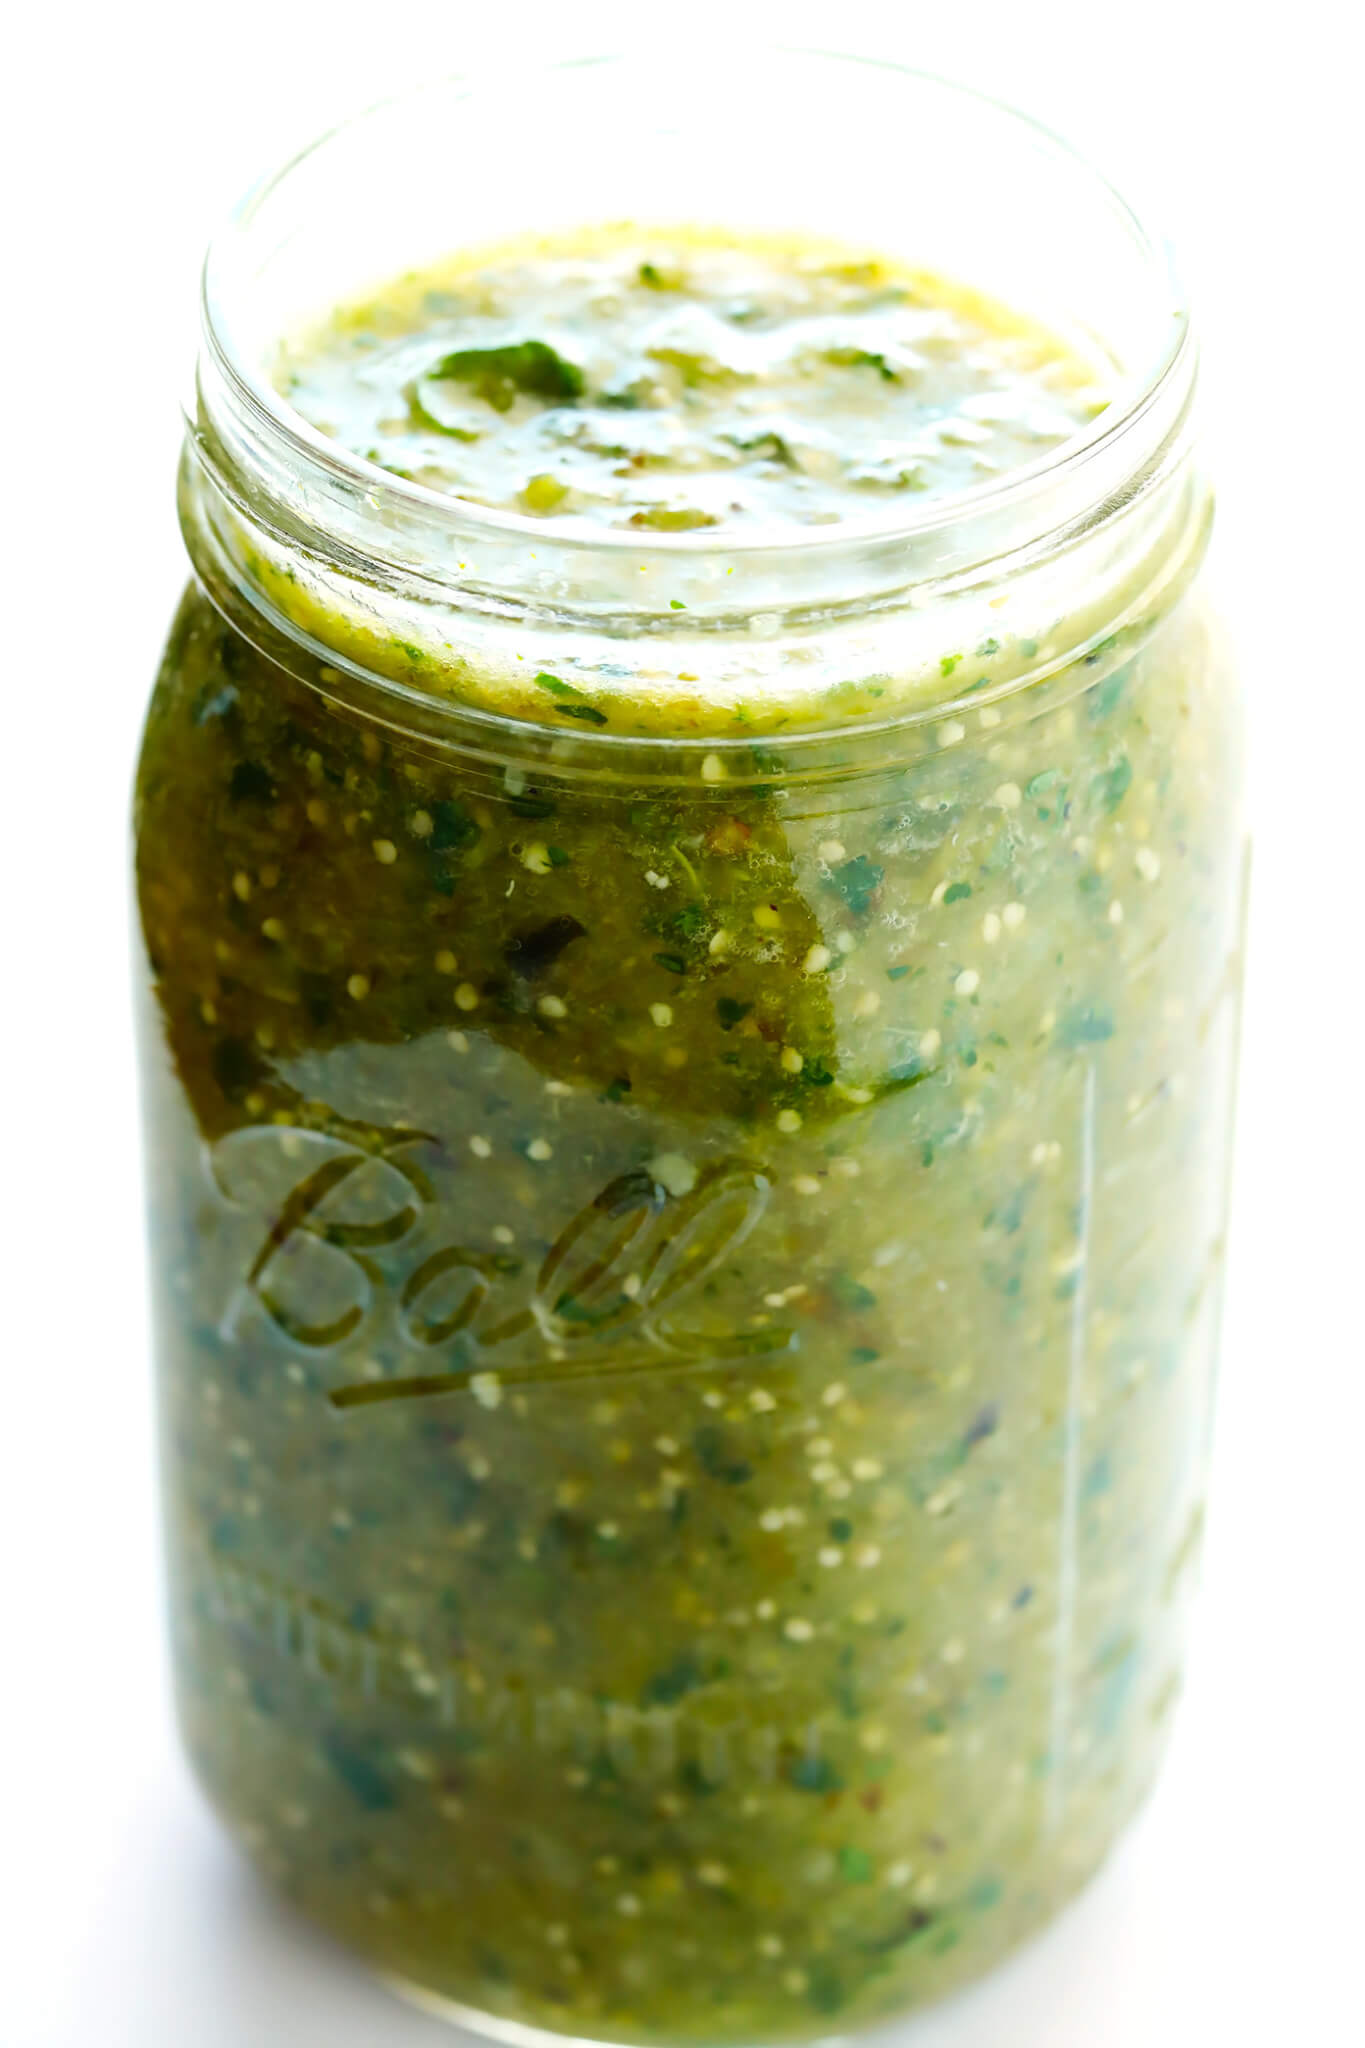 My favorite recipe for homemade Salsa Verde! It's quick and easy to make in the blender or food processor, it's made with fresh tomatillo, onion, cilantro, lime juice, cumin and garlic, and it's the perfect sauce to go with all of your favorite Mexican food! | gimmesomeoven.com (Gluten-Free / Vegetarian / Vegan)